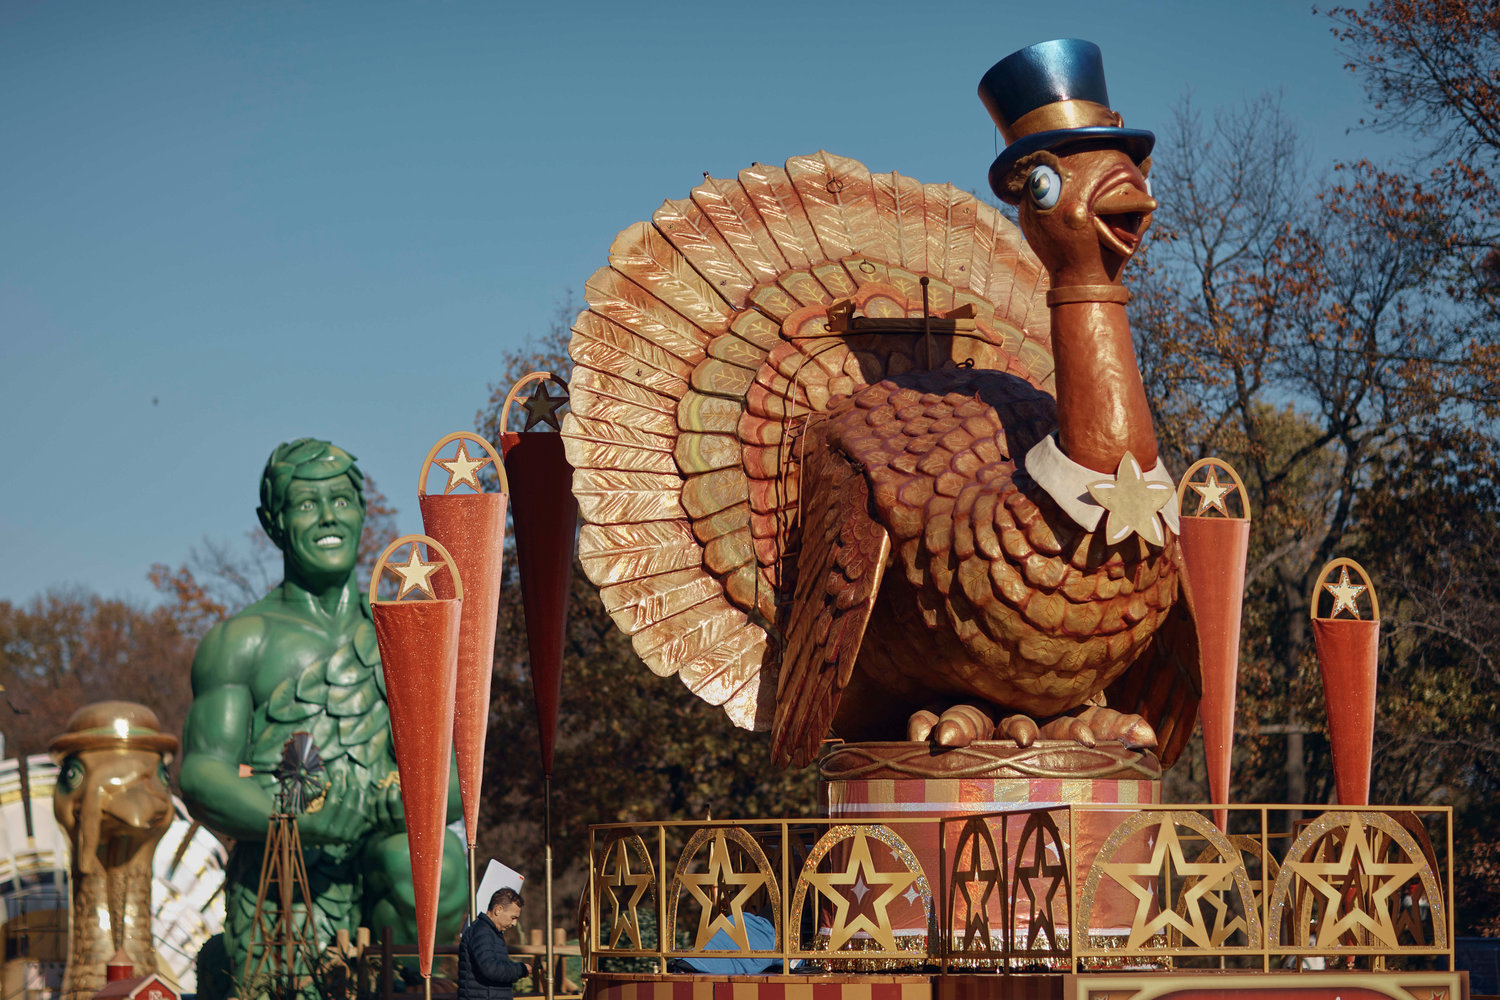 A man inspects a float of Tom Turkey that is lined up for the Macy's Thanksgiving Day Parade on Wednesday, Nov. 23, 2022. Macy's Thanksgiving Day Parade will take place on Thursday.